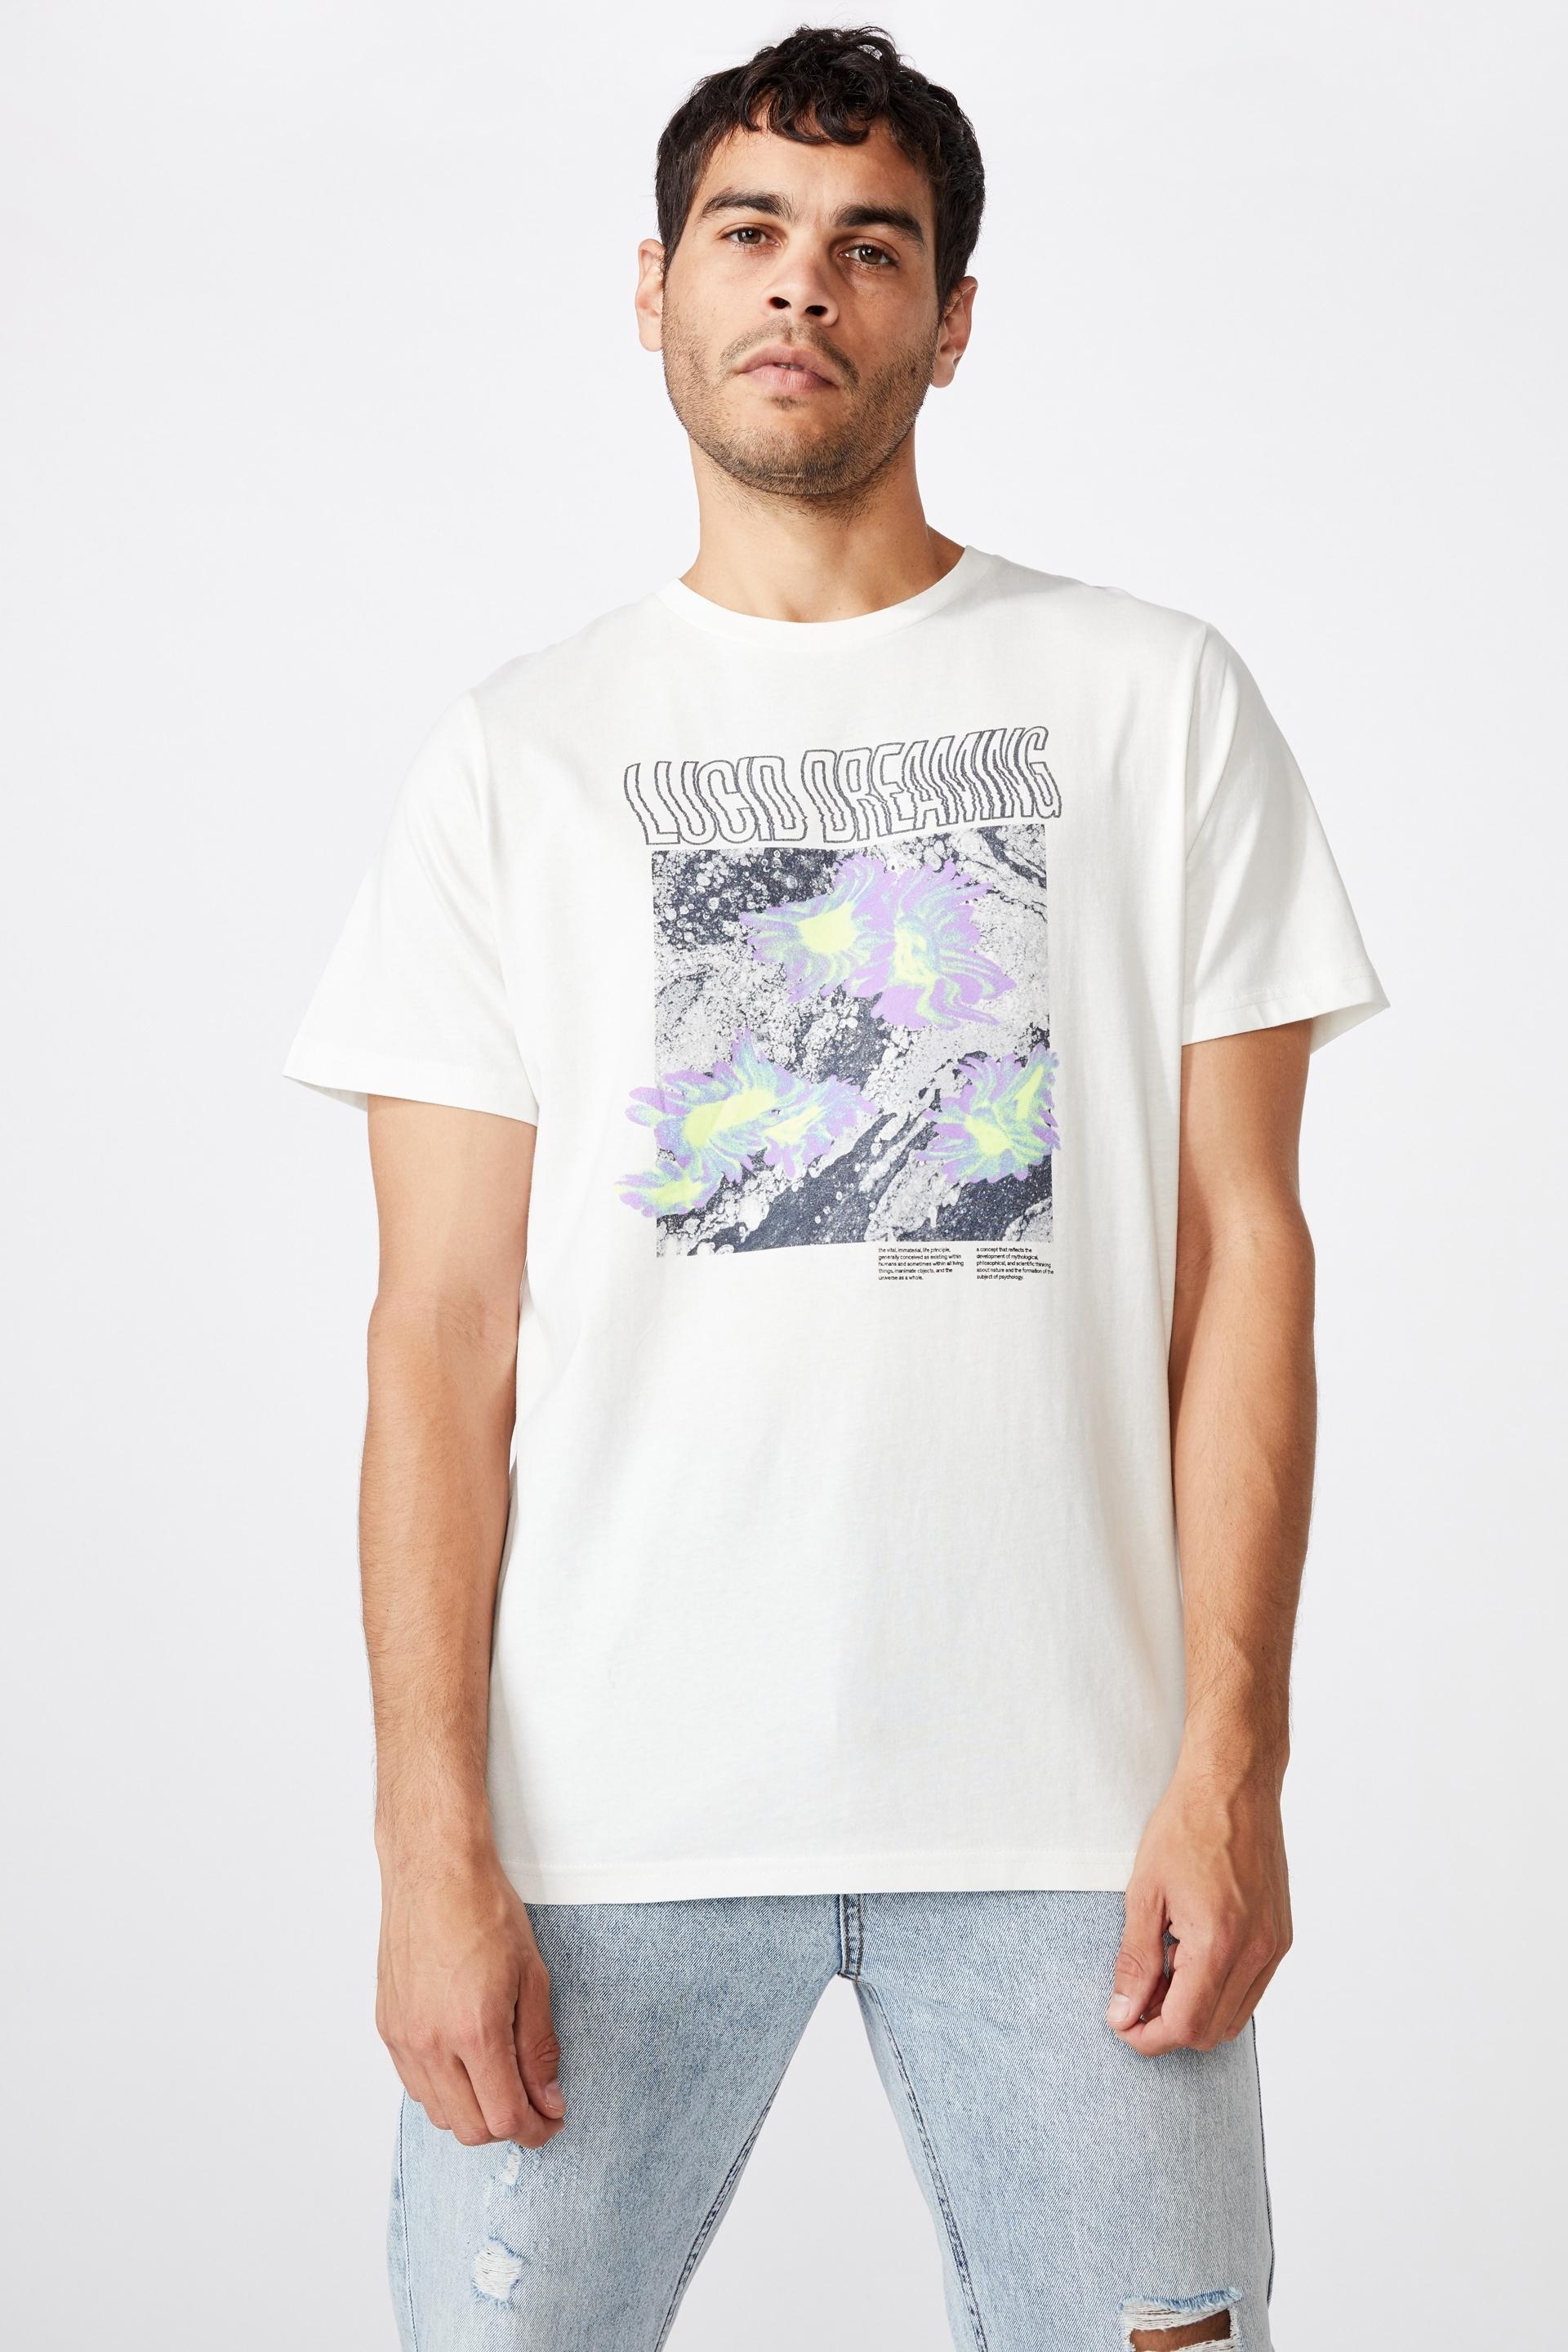 Tbar lucid dreaming art t-shirt - vintage white Cotton On T-Shirts ...